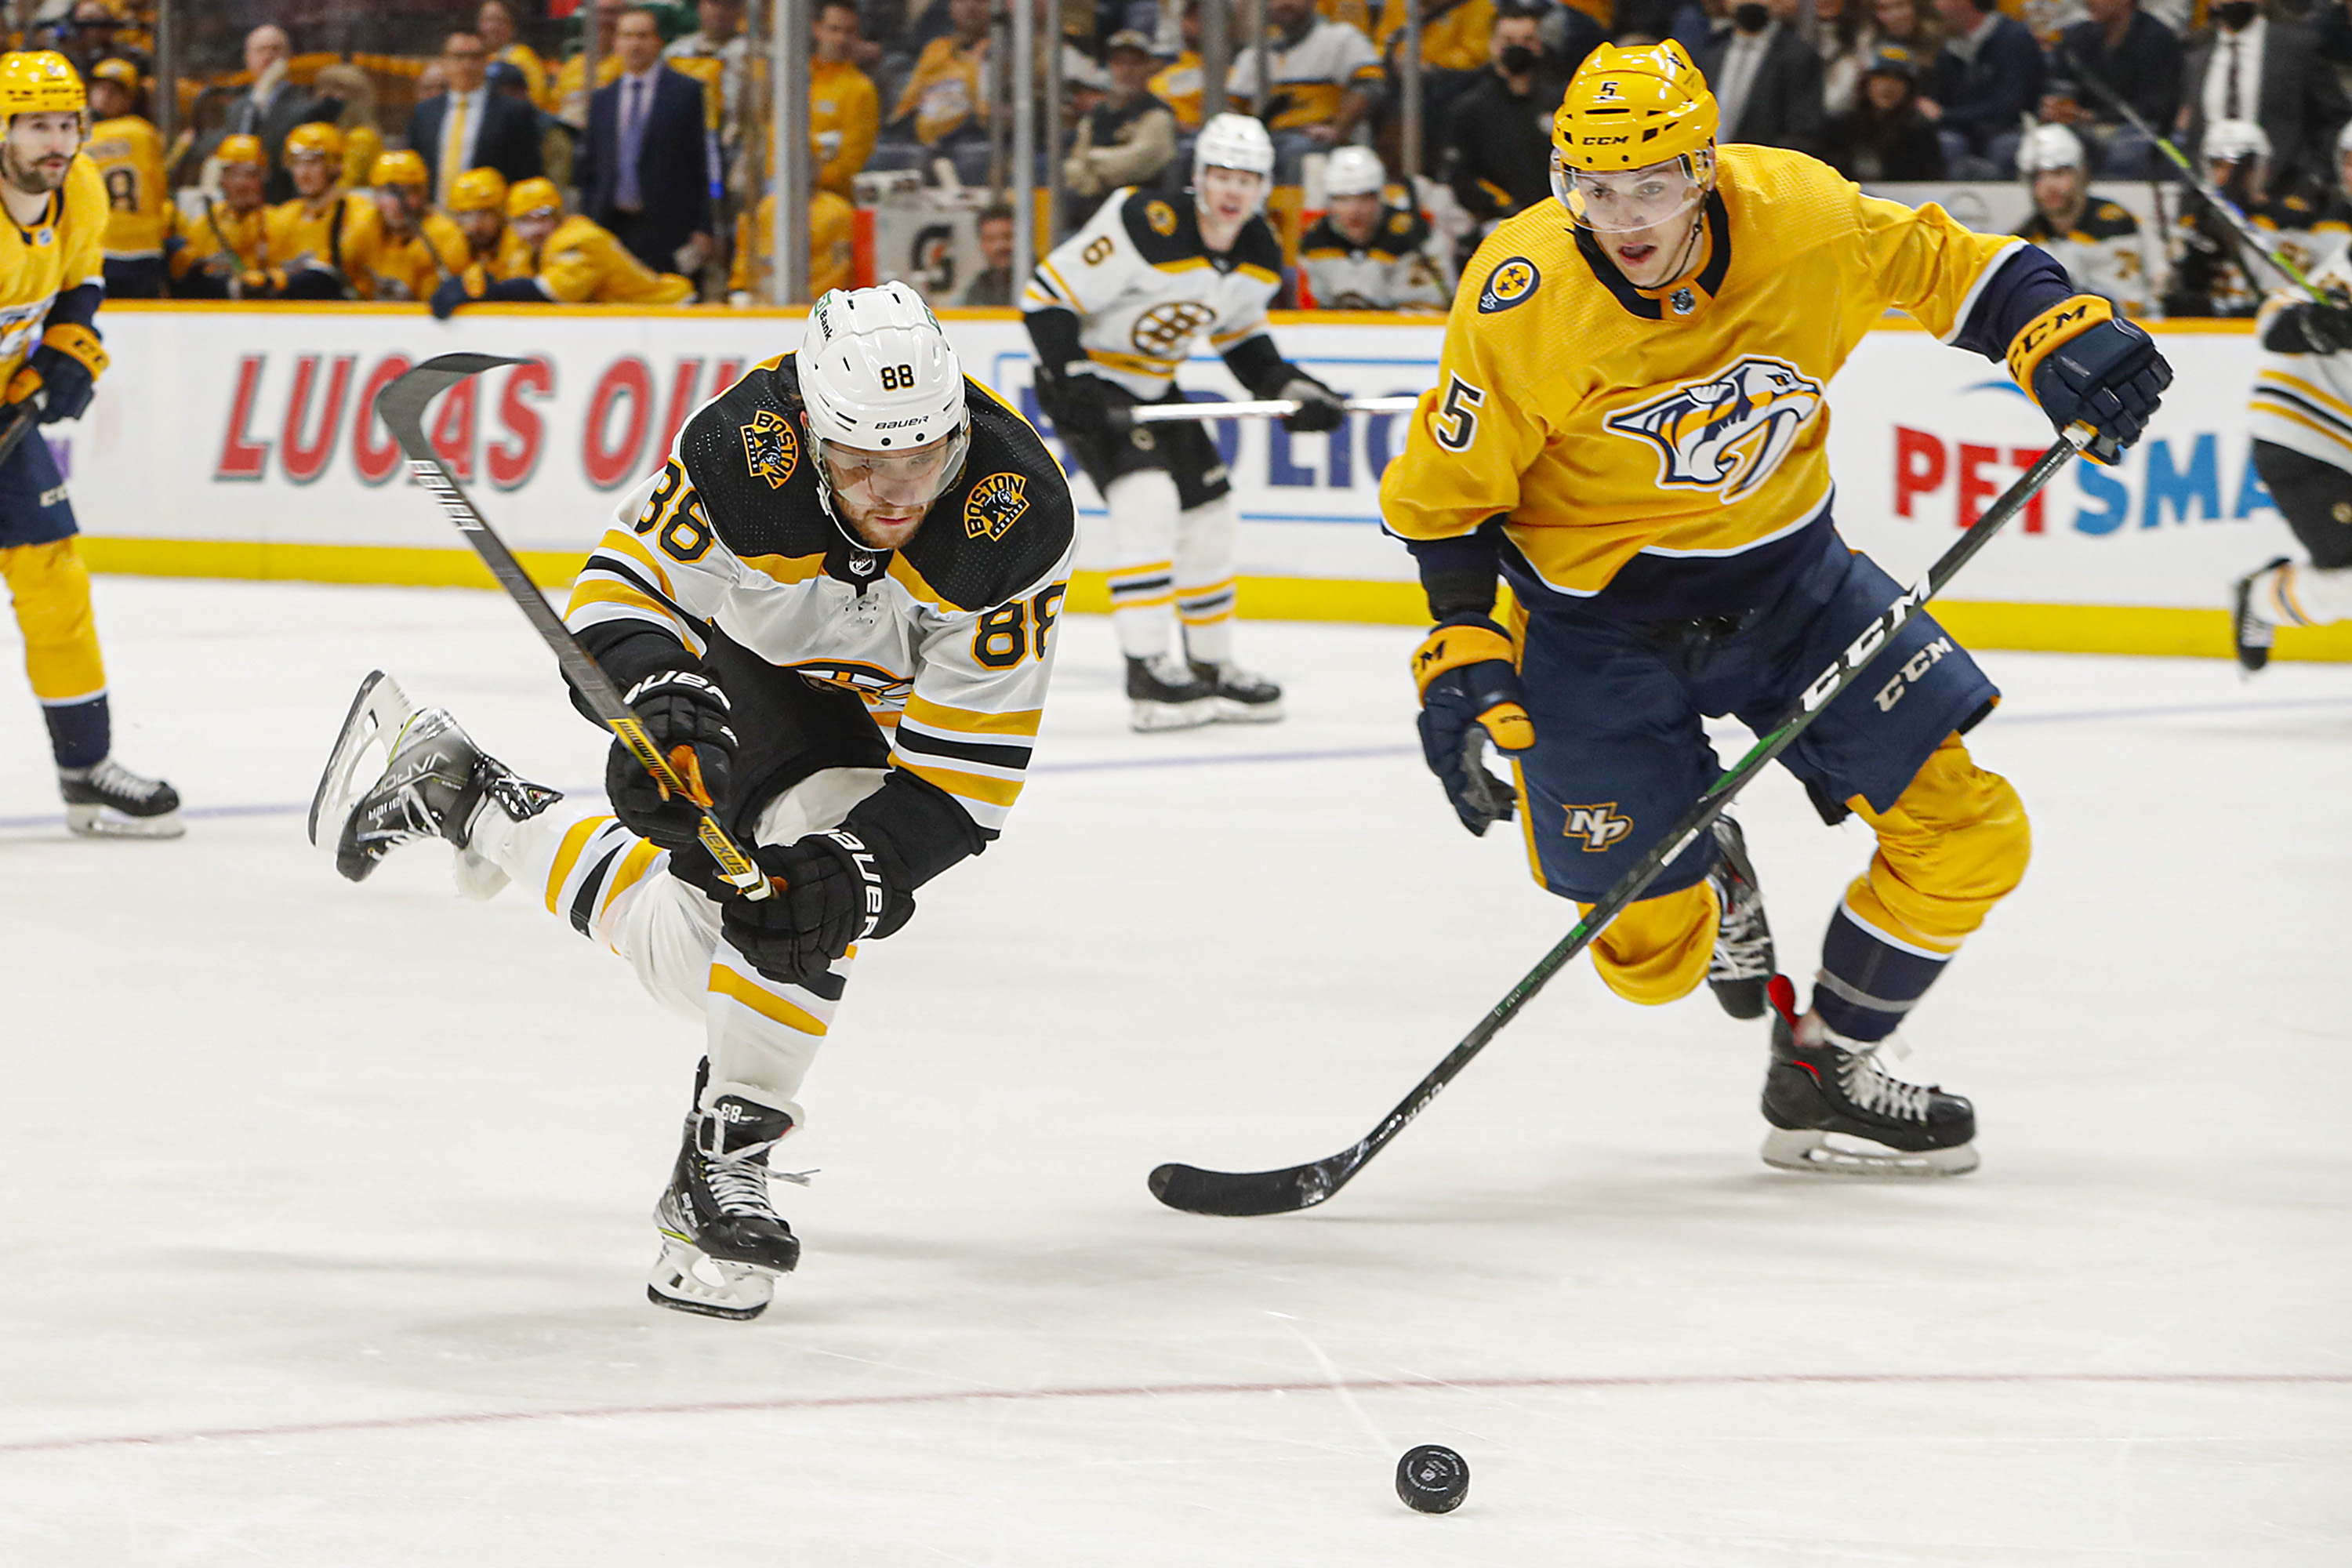 David Pastrnak and Nashville's Matt Benning chase the puck during the second period of Thursday's game.